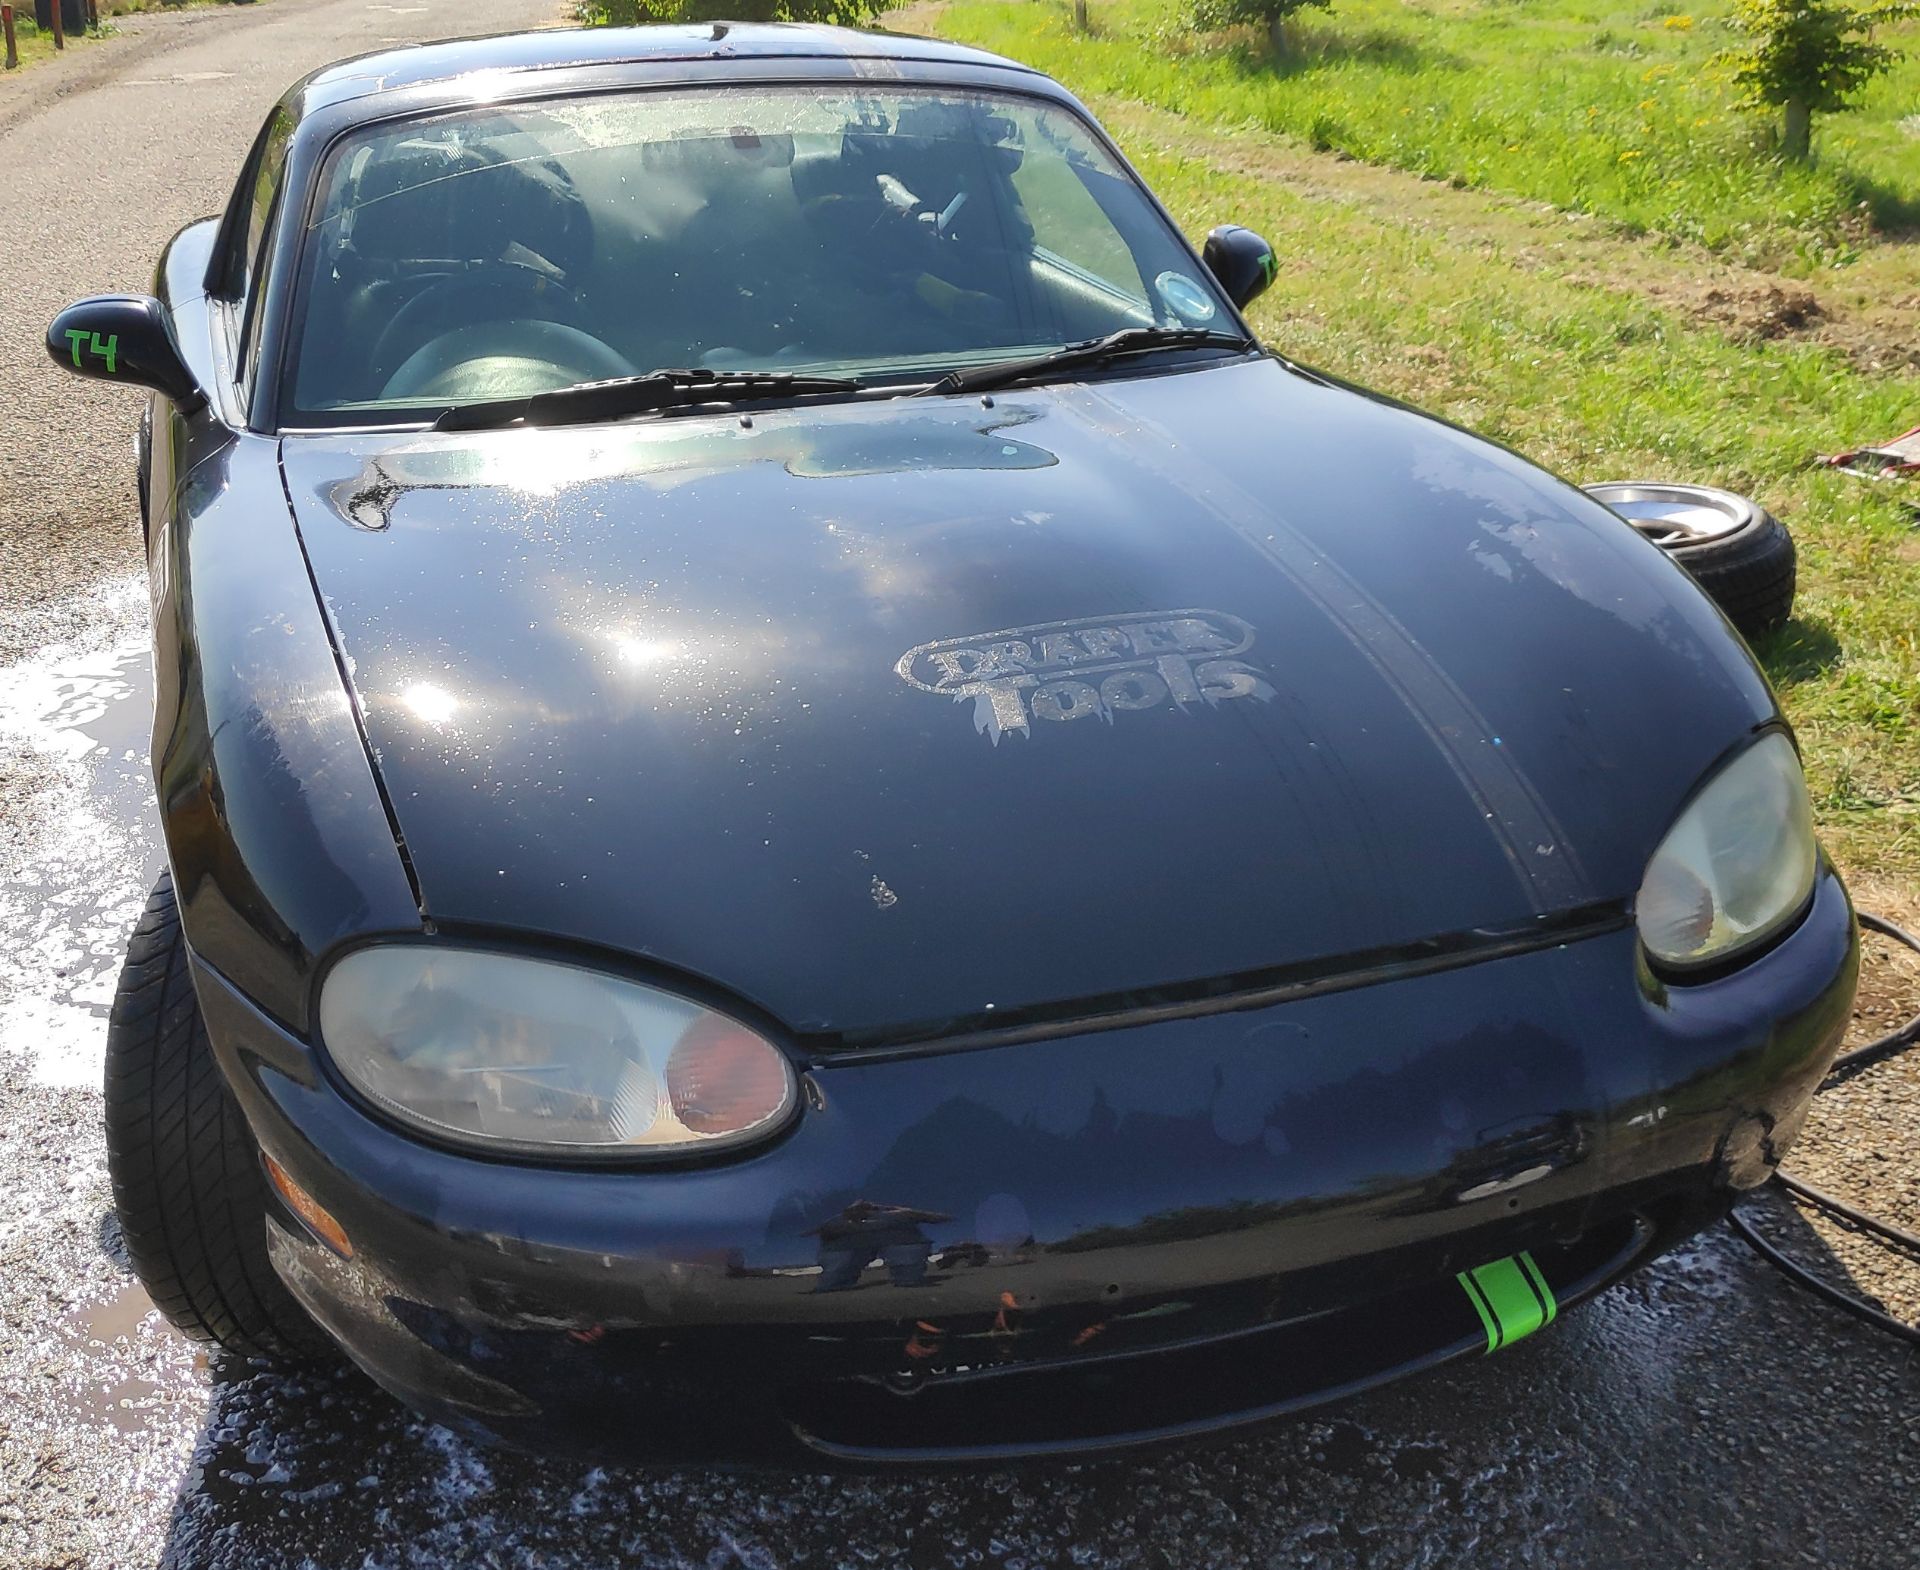 1 x 2000 Mazda MX5 Mk2 Drift Car - Includes 3 Extra Wheels/Tyres - Ref: T4 - CL682 - Location: Bedfo - Image 7 of 77